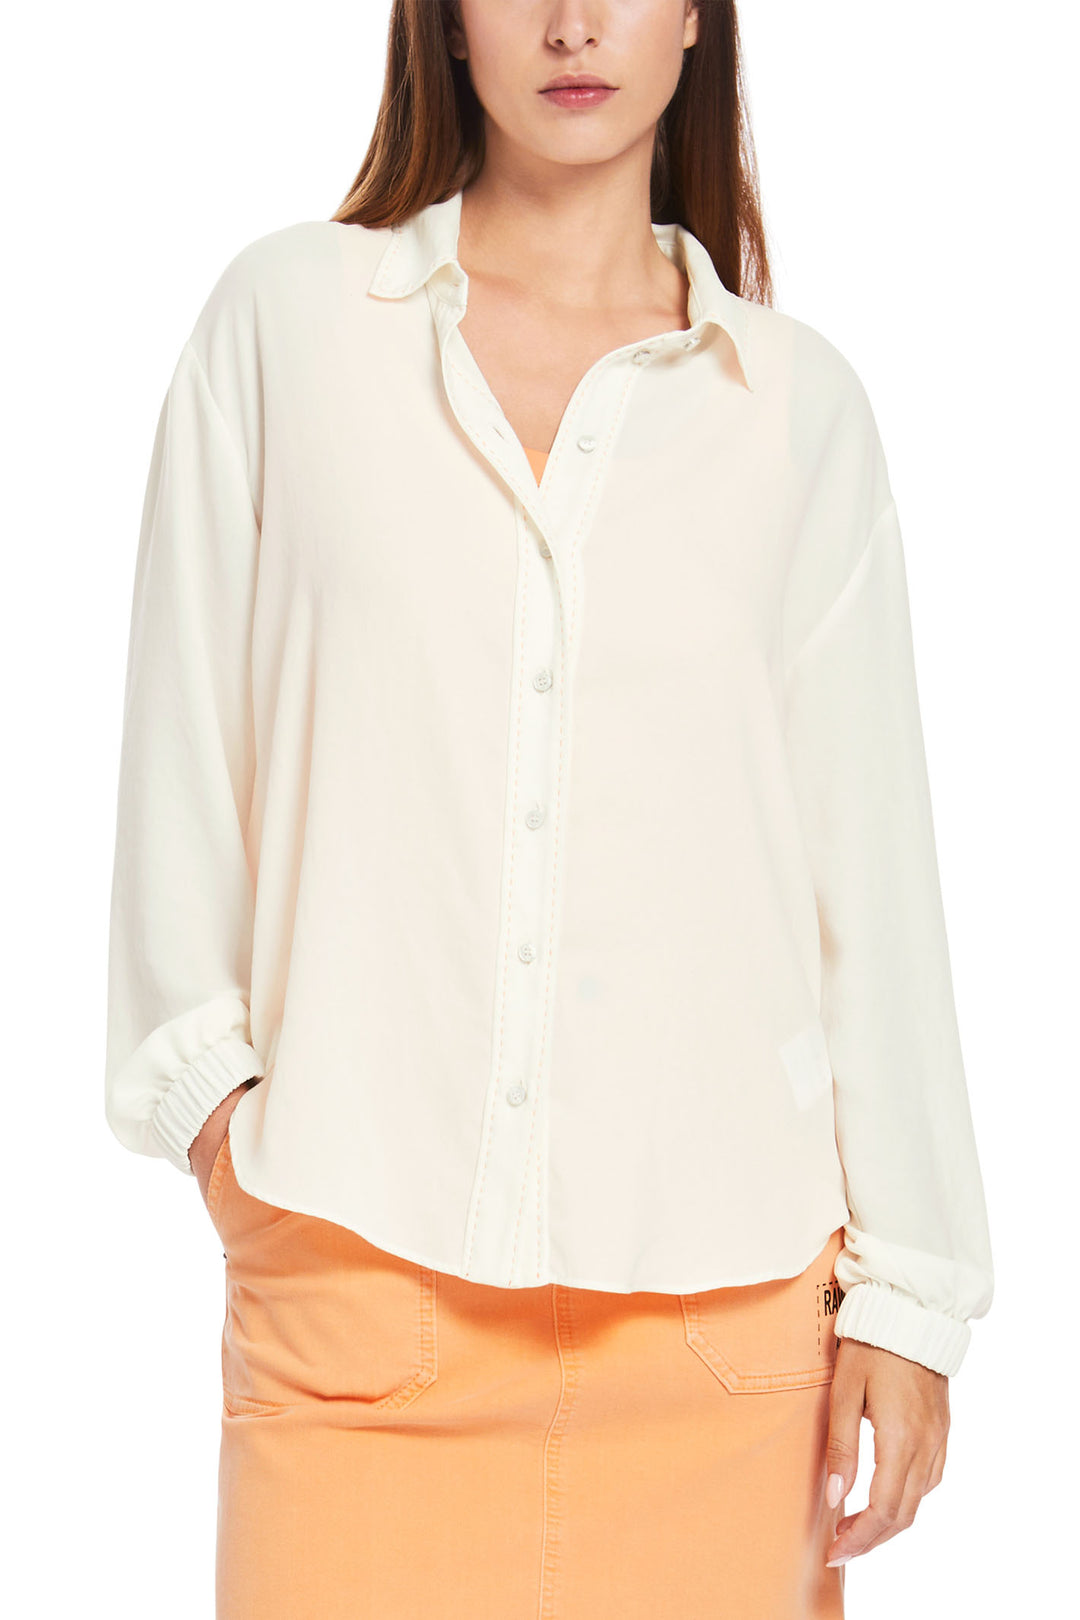 Marc Cain Sports Shirt Off White Cream Relaxed Fit XS 51.08 W41 110 - Olivia Grace Fashion